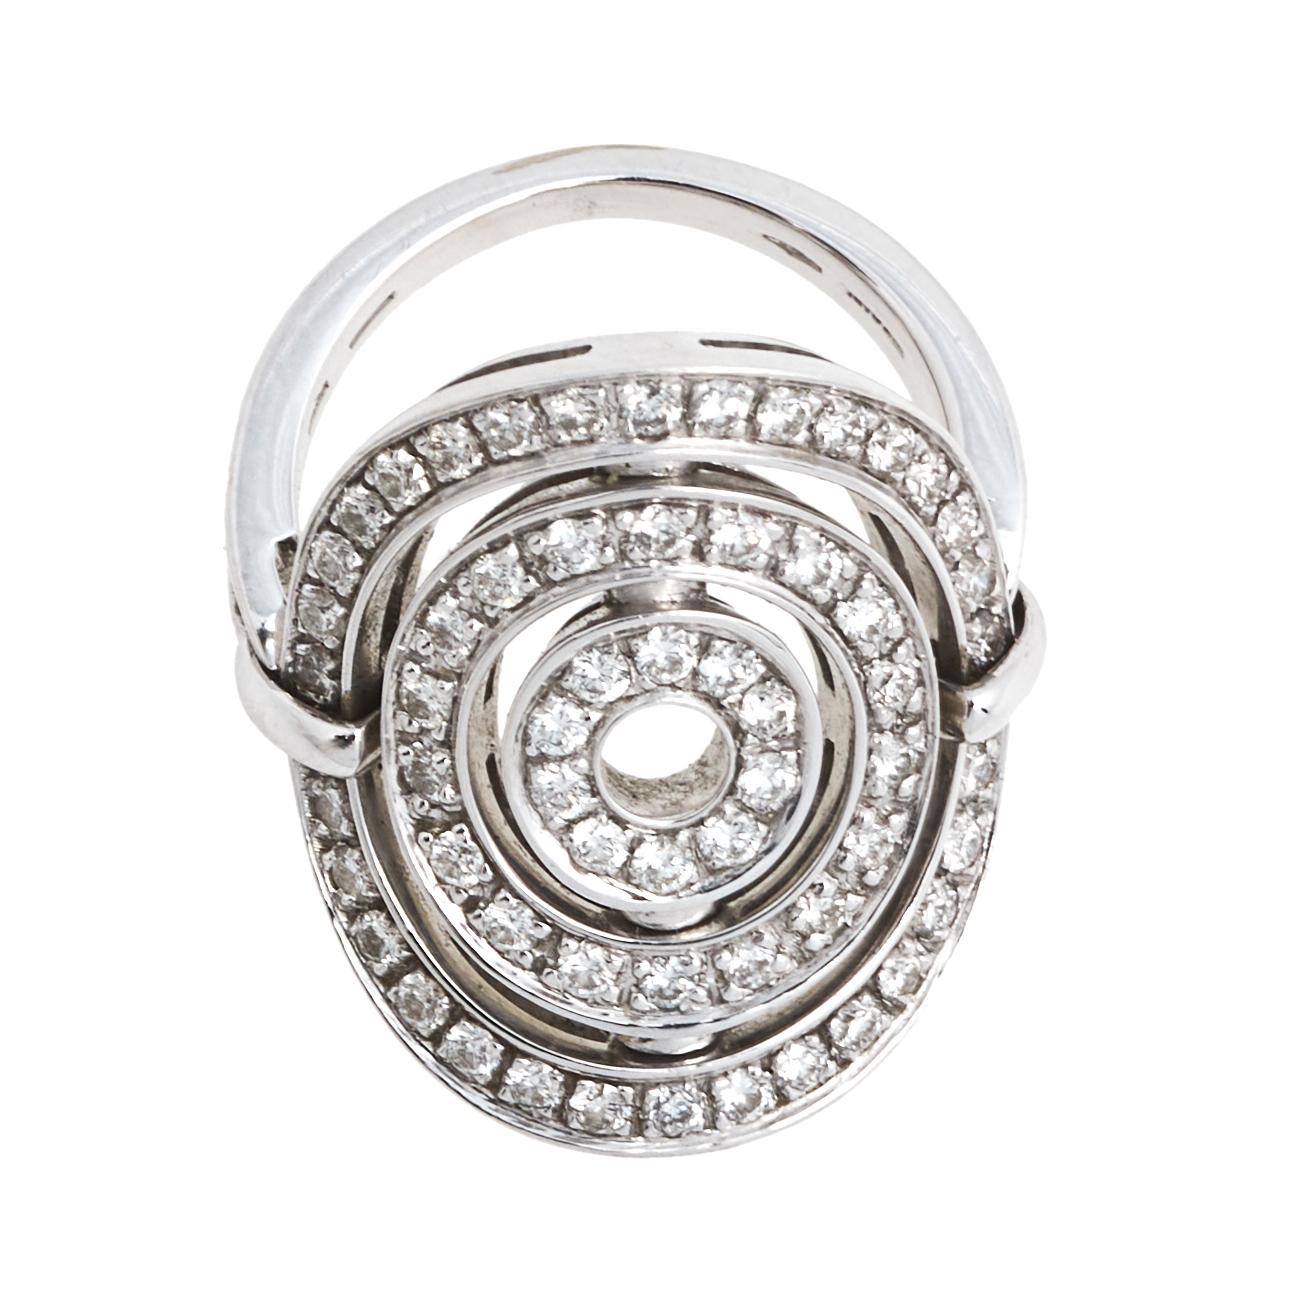 Well-crafted jewelry like this one is hard to come by. This Bvlgari ring speaks beauty with its details. Crafted from 18k white gold, the ring has smooth curves and a minimal charm. It has a detail of three circles as the head, all of which are